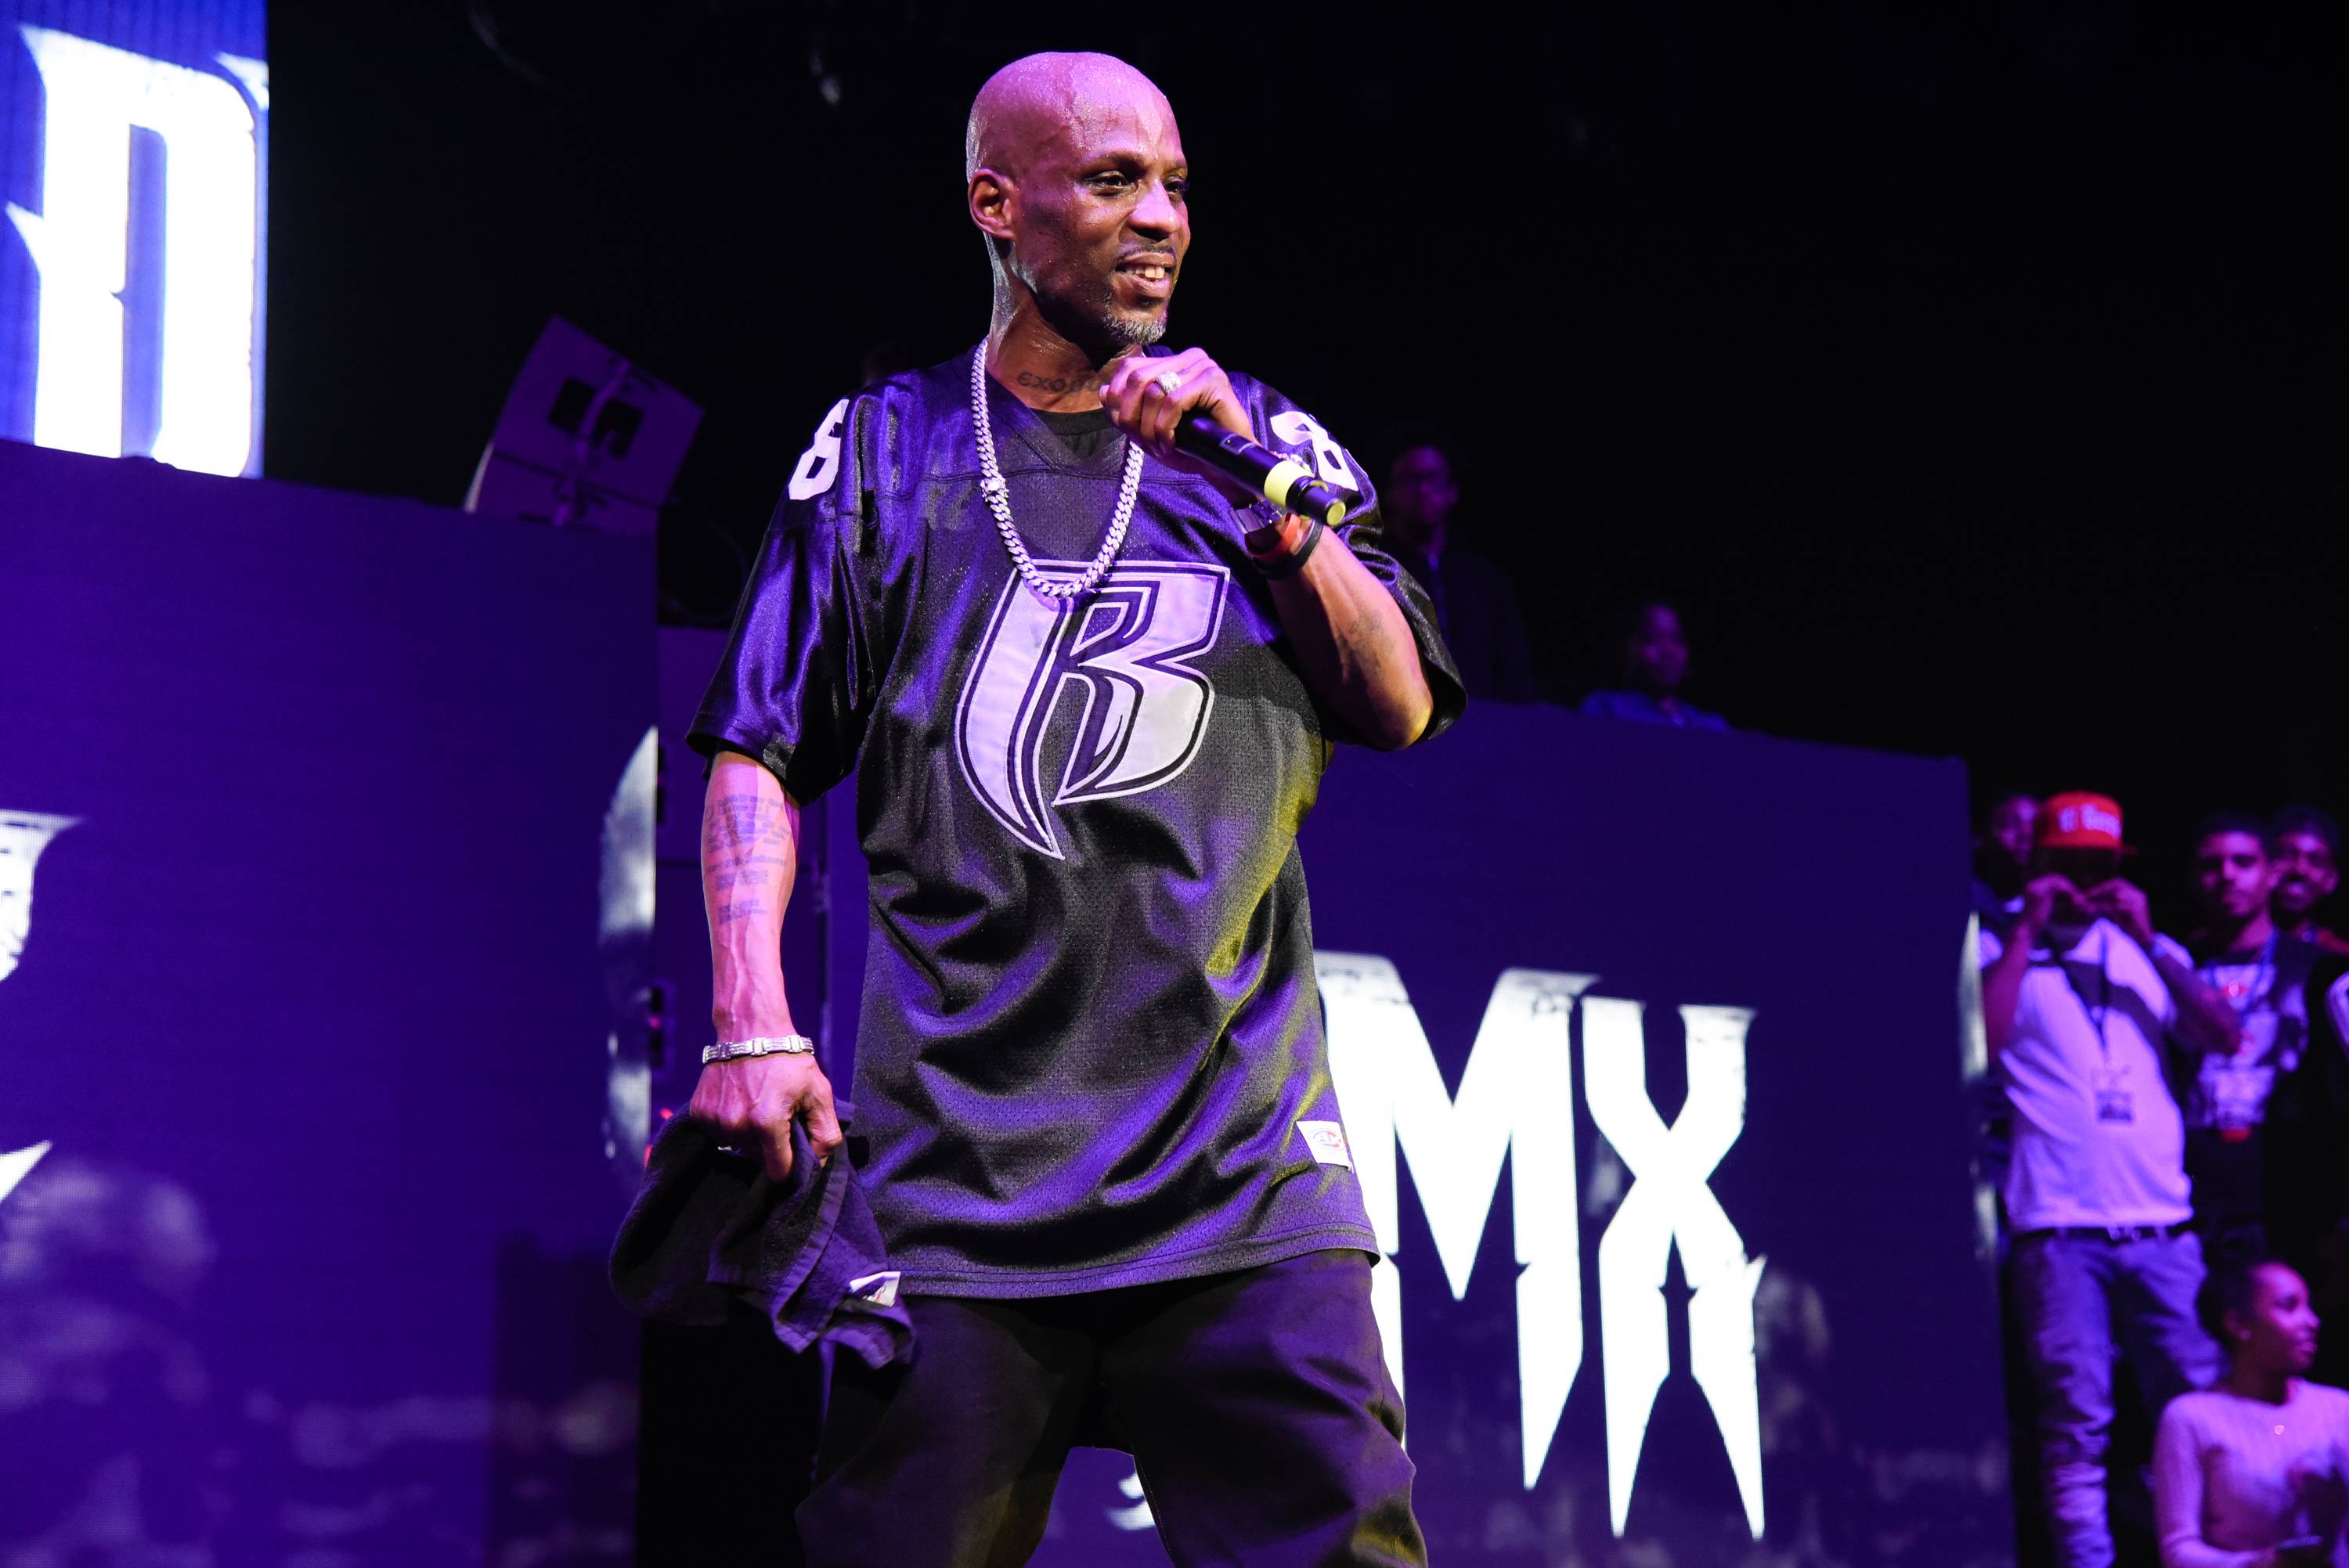 NEW YORK, NY - APRIL 21:  Rapper DMX performs live on stage for the Ruff Ryder's Reunion Tour 2017 at Barclays Center of Brooklyn on April 21, 2017 in New York City.  (Photo by Matthew Eisman/Getty Images)